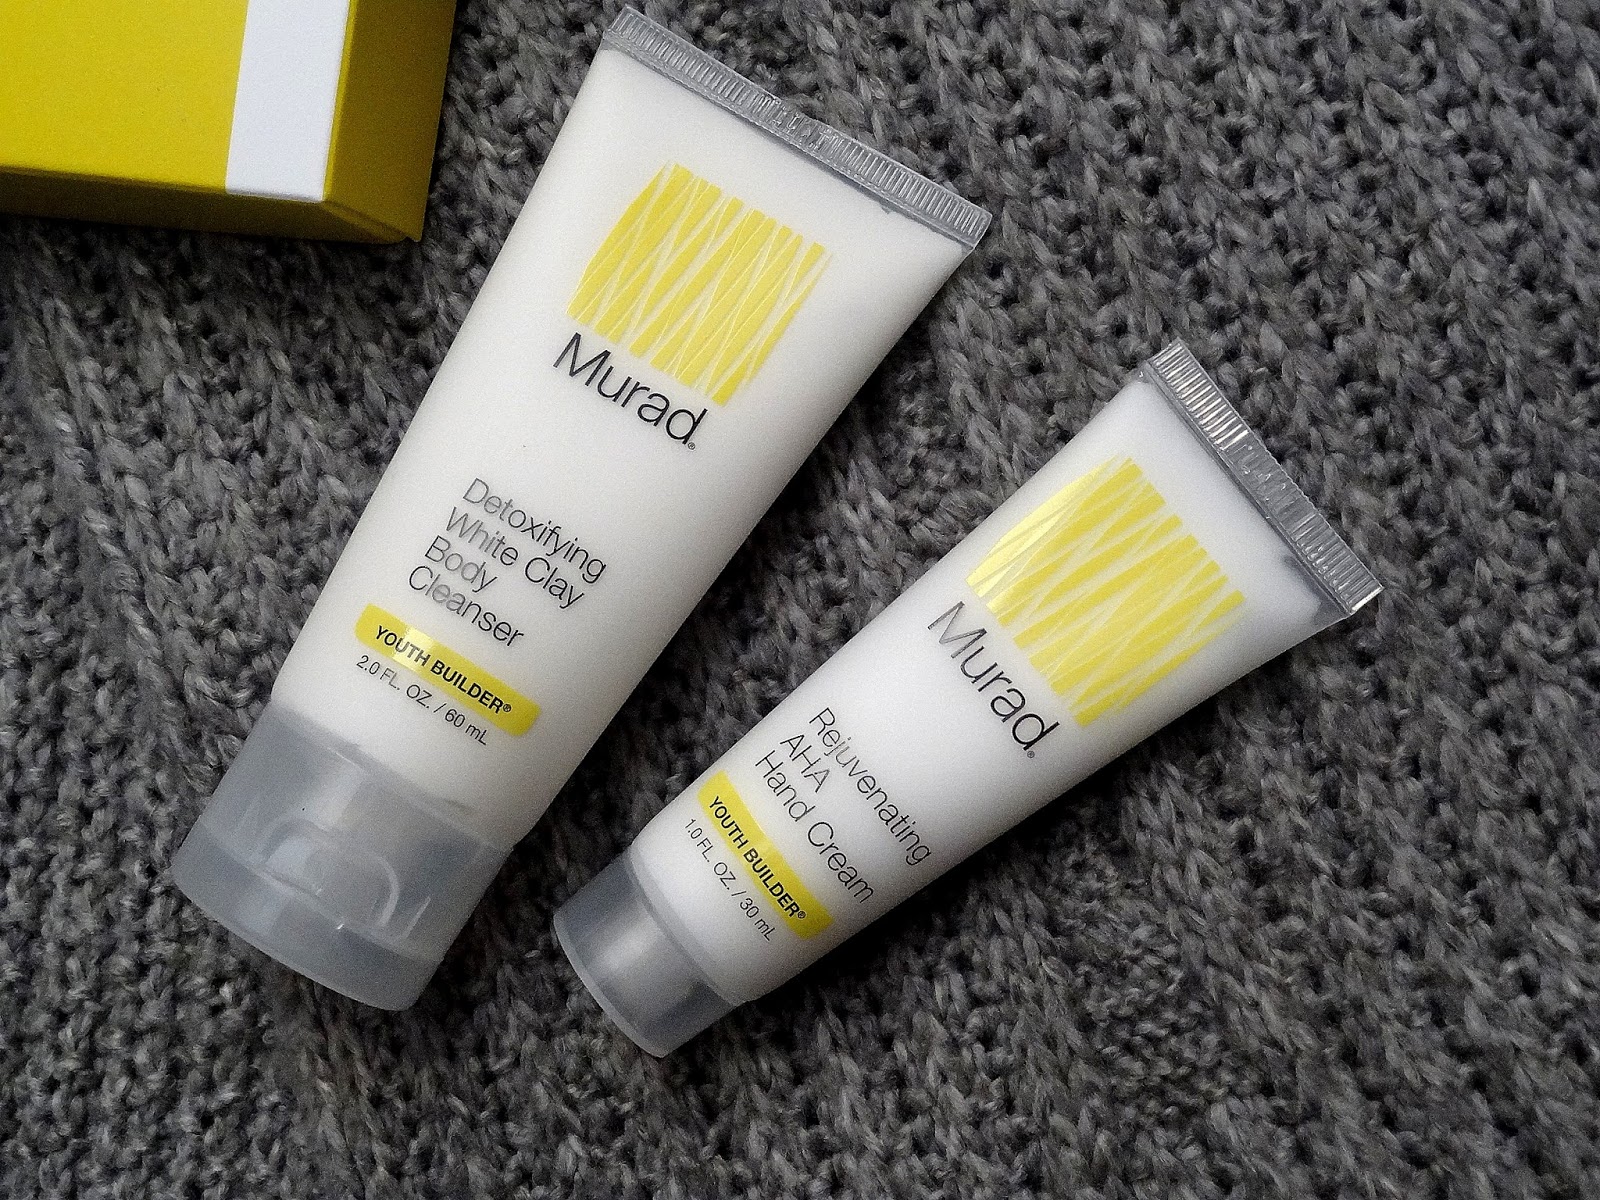 Murad Youth Booster Bodycare Preview Kit